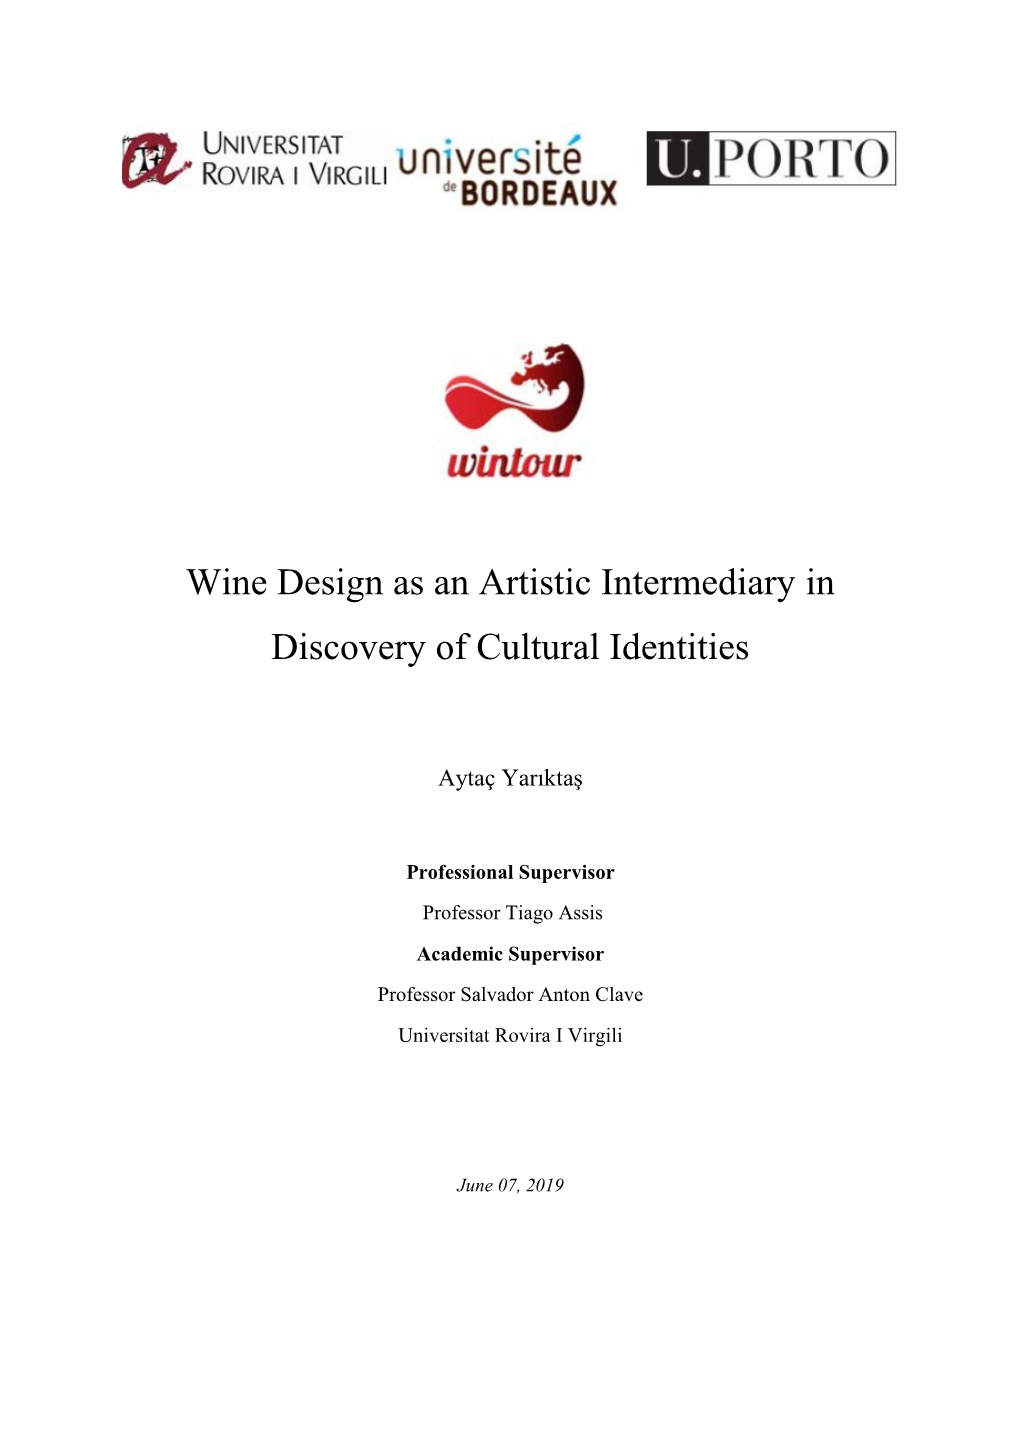 Wine Design As an Artistic Intermediary in Discovery of Cultural Identities